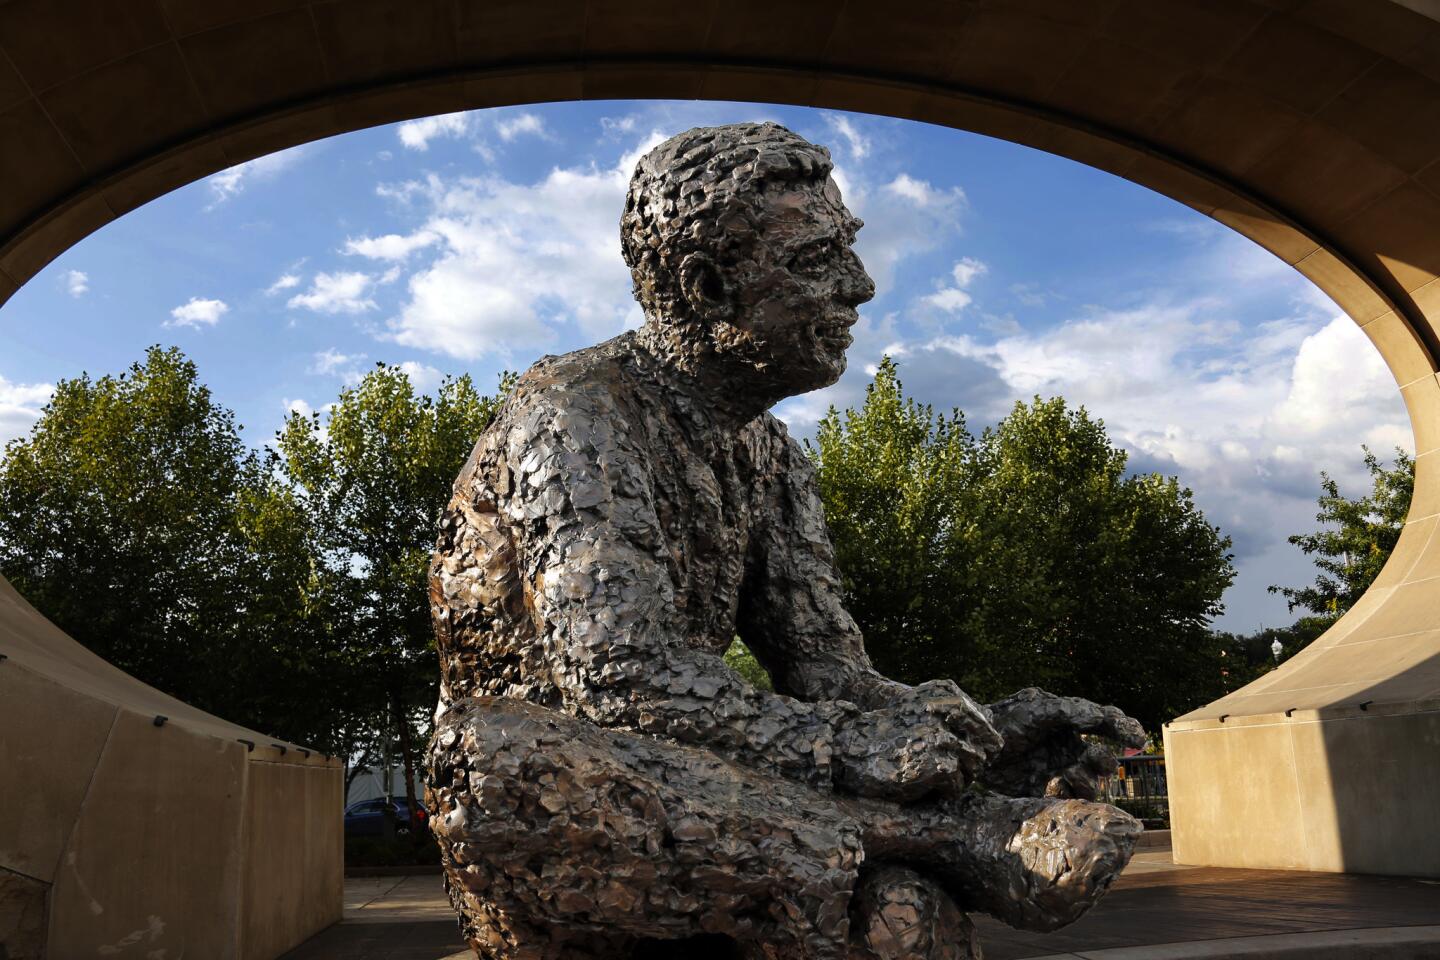 A statue of Mr. Fred Rogers at the Mr. Rogers Memorial on the Northside of Pittsburgh. A new Fred Rogers Trail promoted by VisitPA.com includes the sculpture along with museums and other sites.